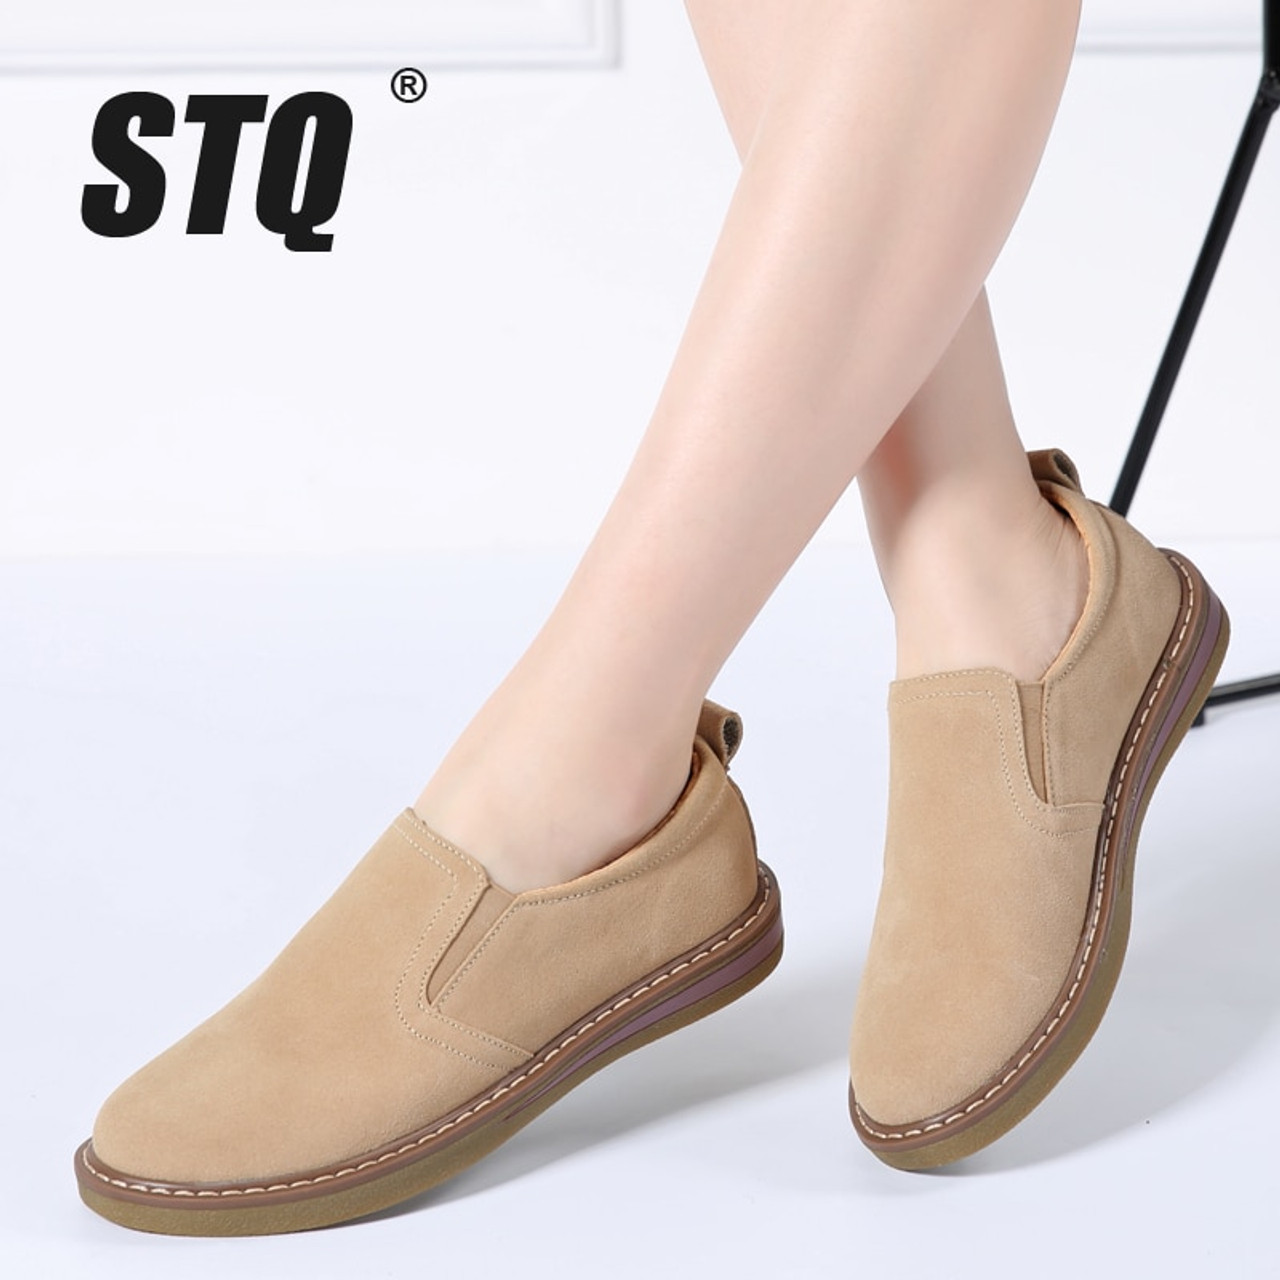 womens flat suede shoes